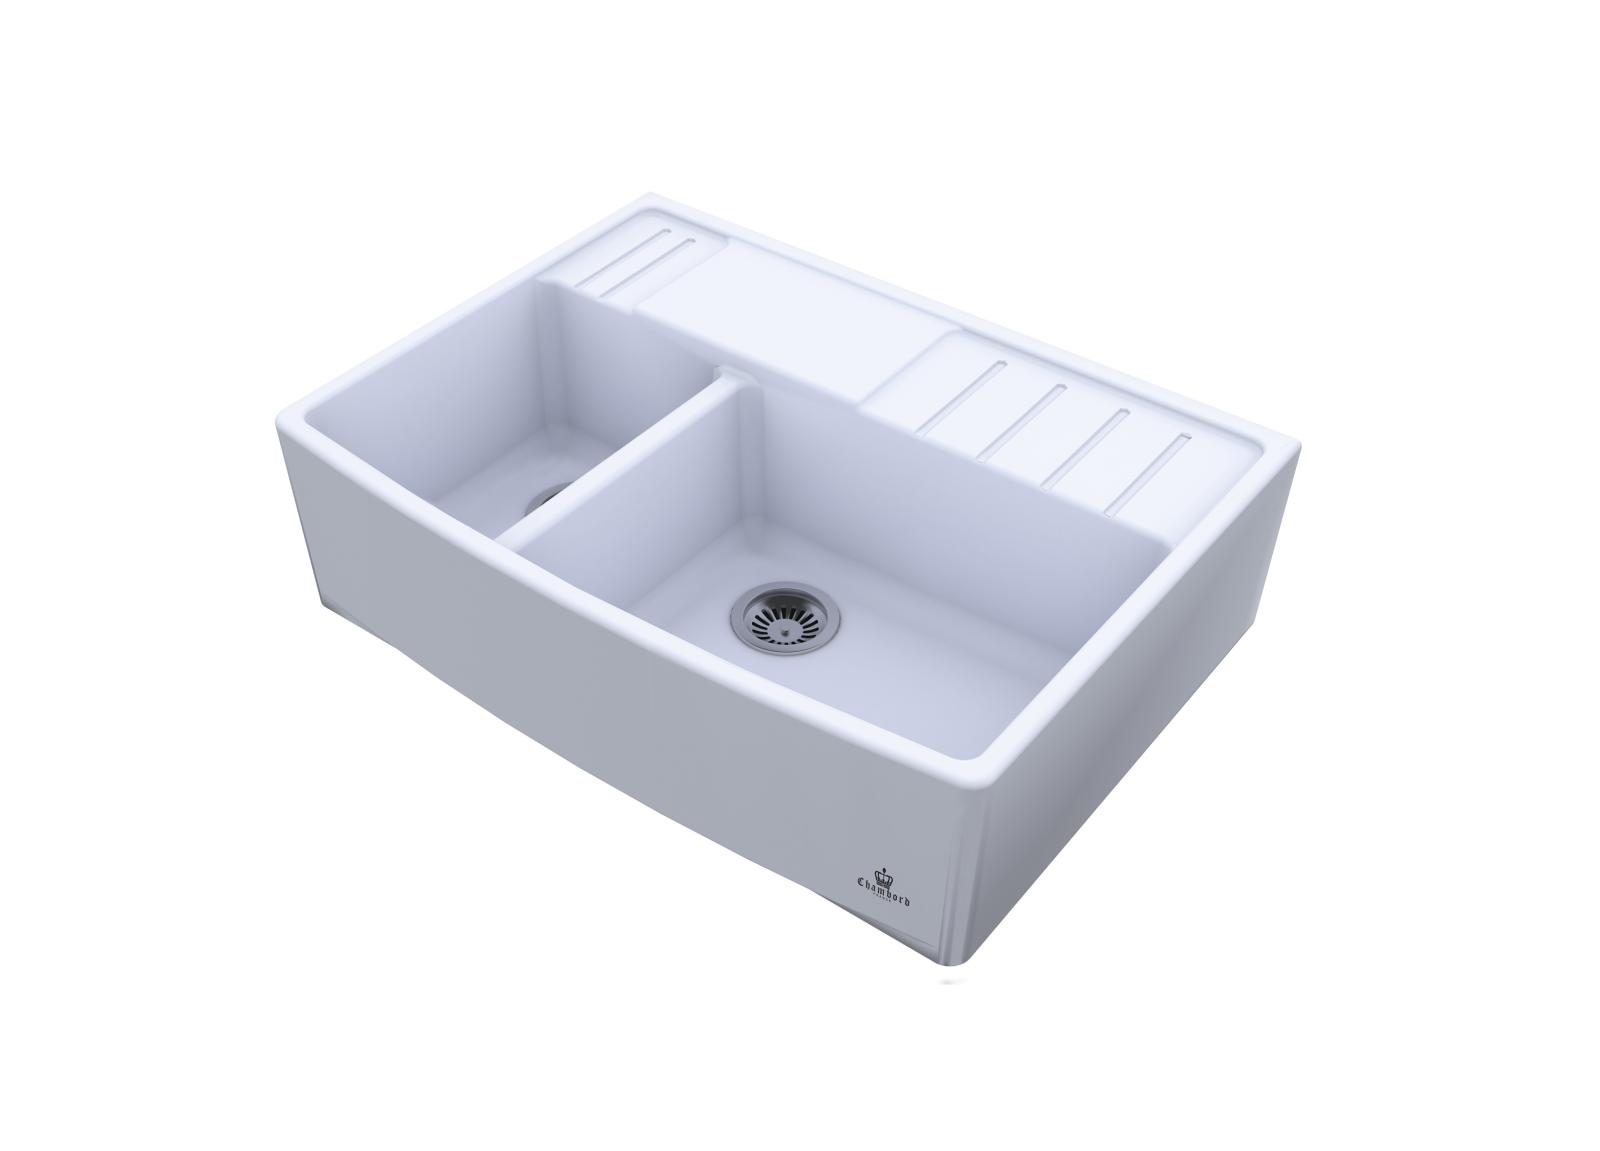 High-quality sink Clotaire III - one and a half bowl, ceramic - ambience 1